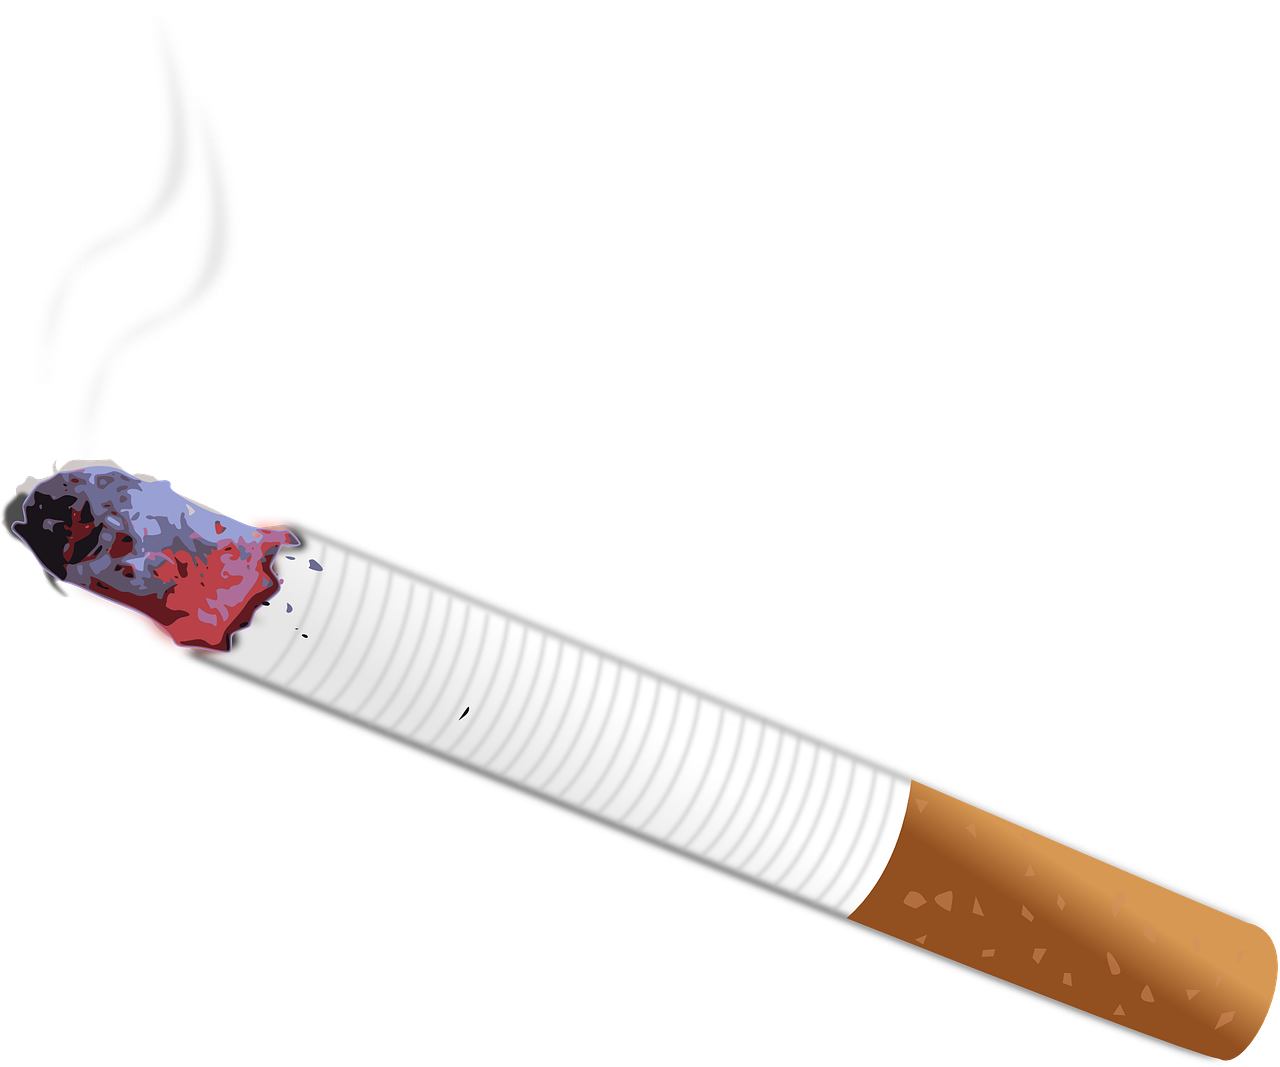 cigarette lit filter-tipped free photo